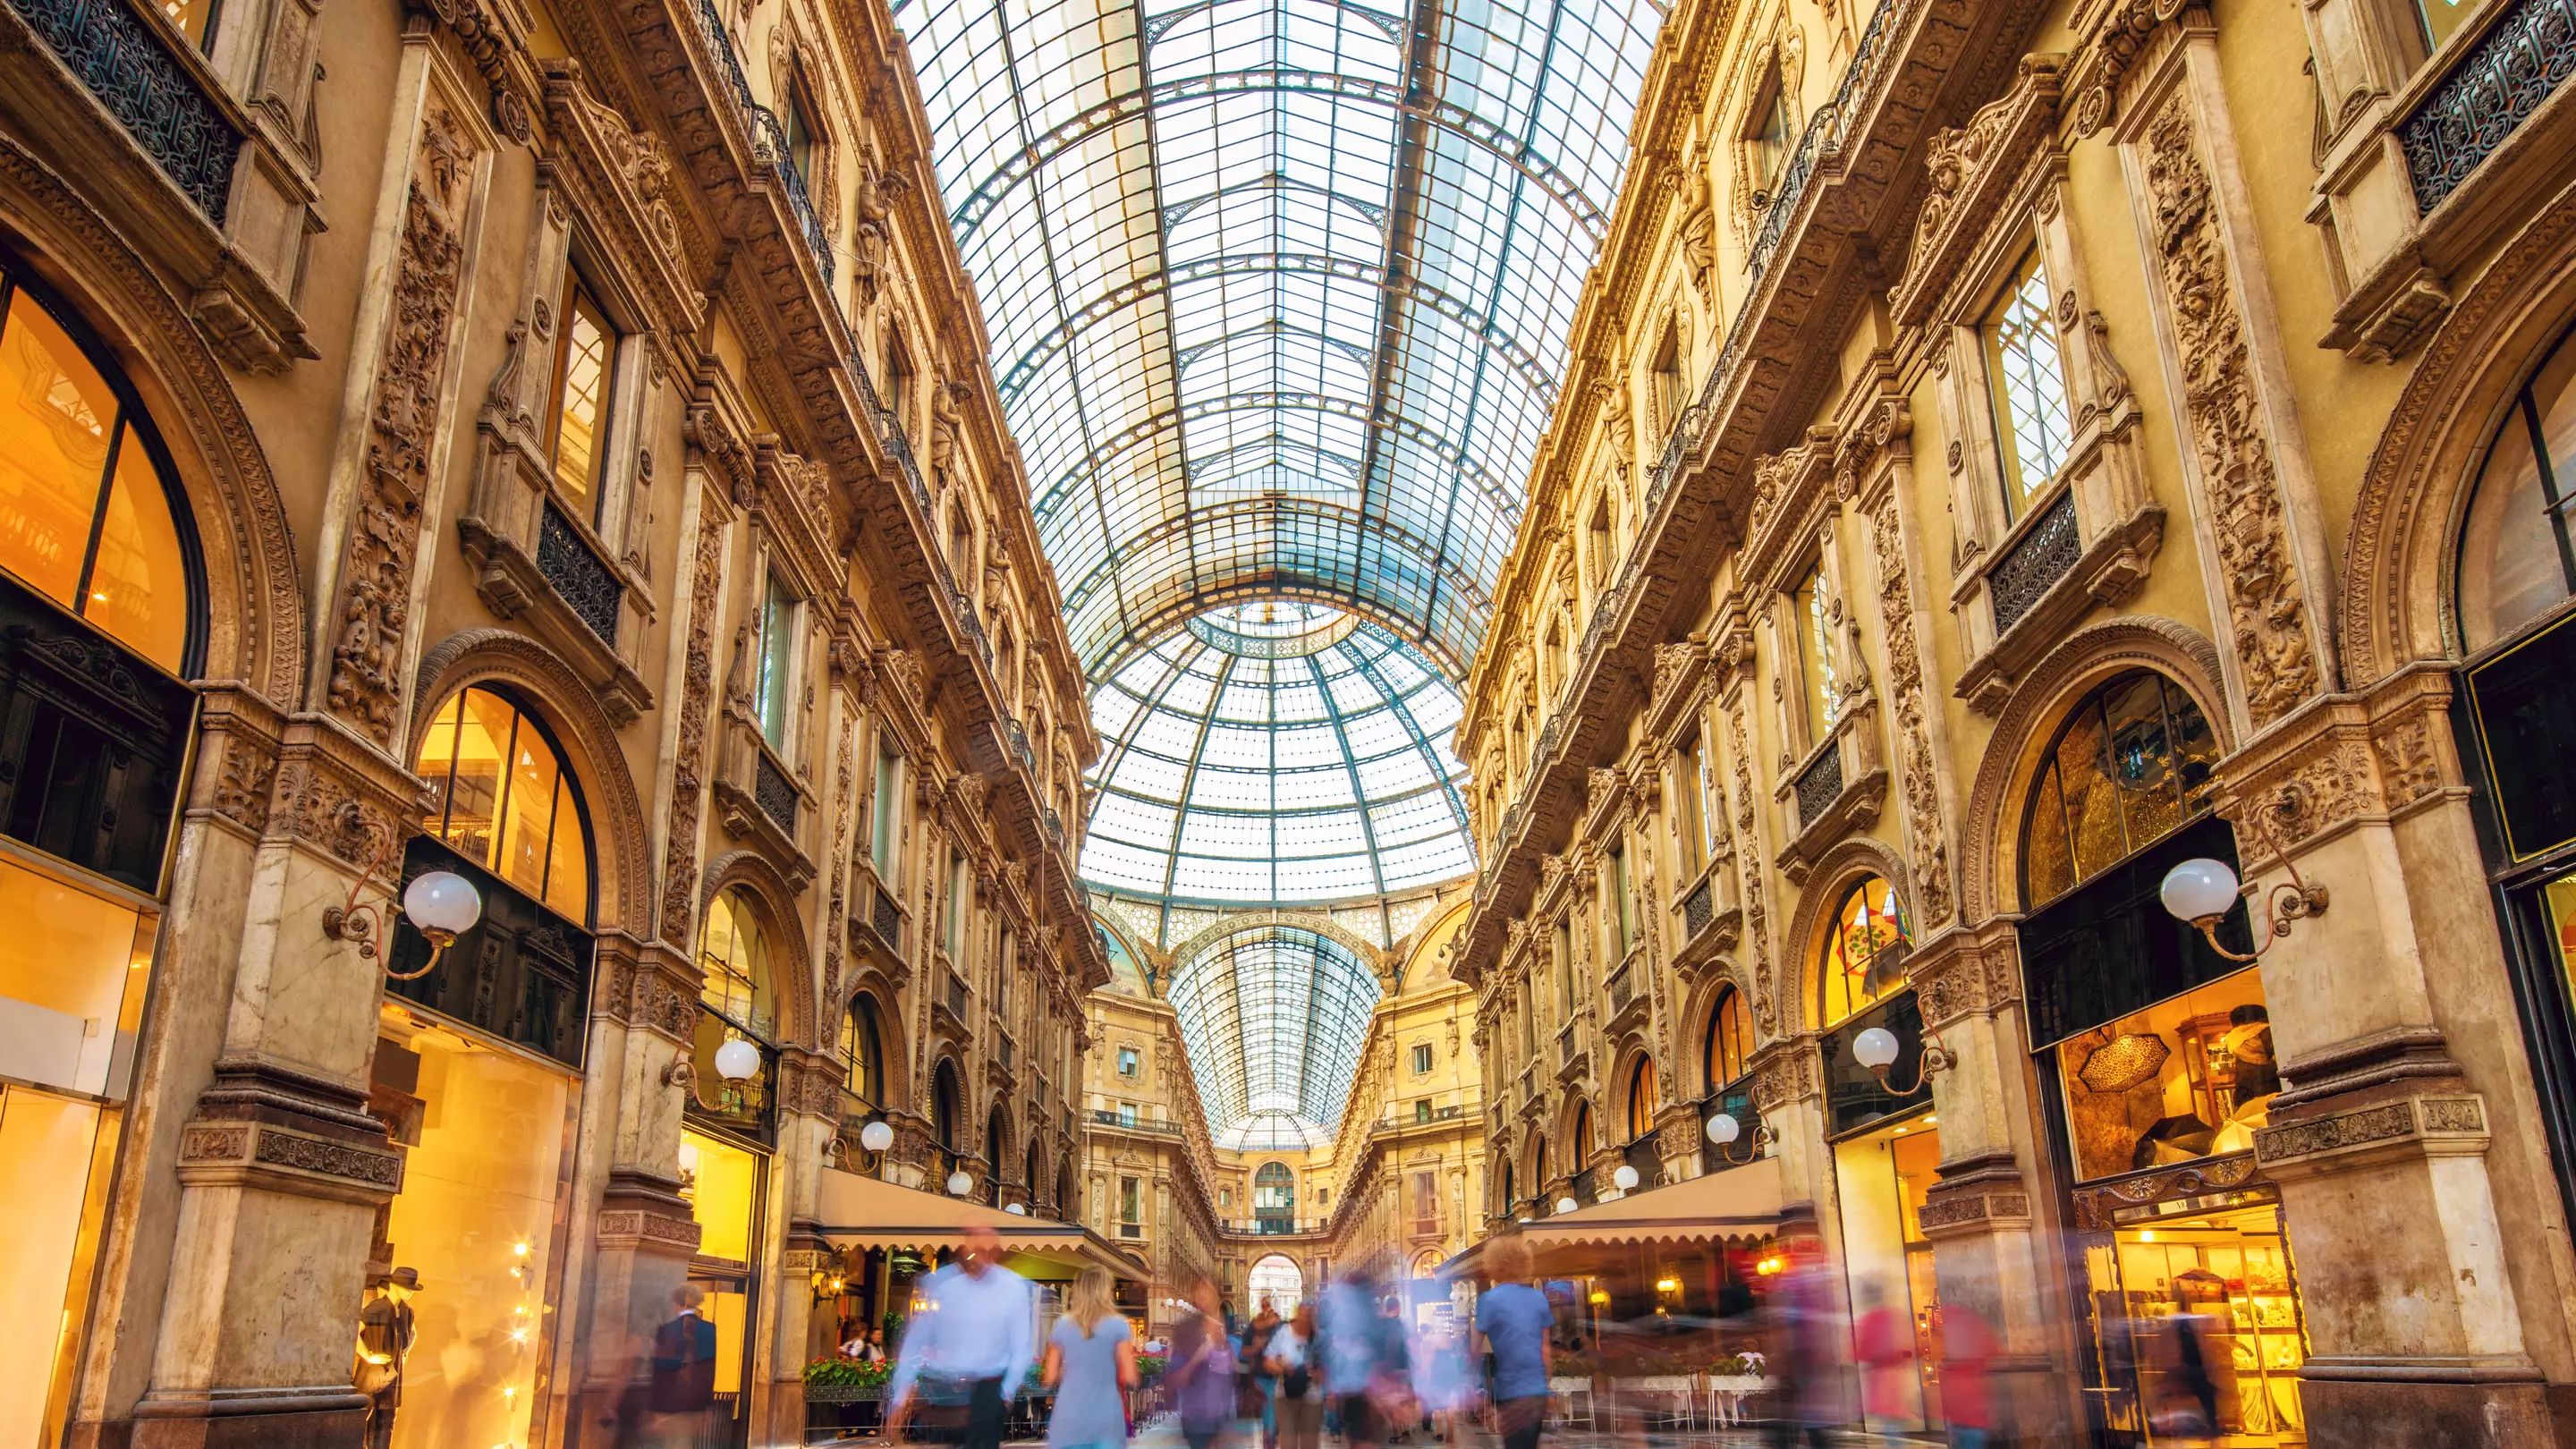 Galleria Vittorio Emanuele II in Mailand © Gettyimages com, Mlenny